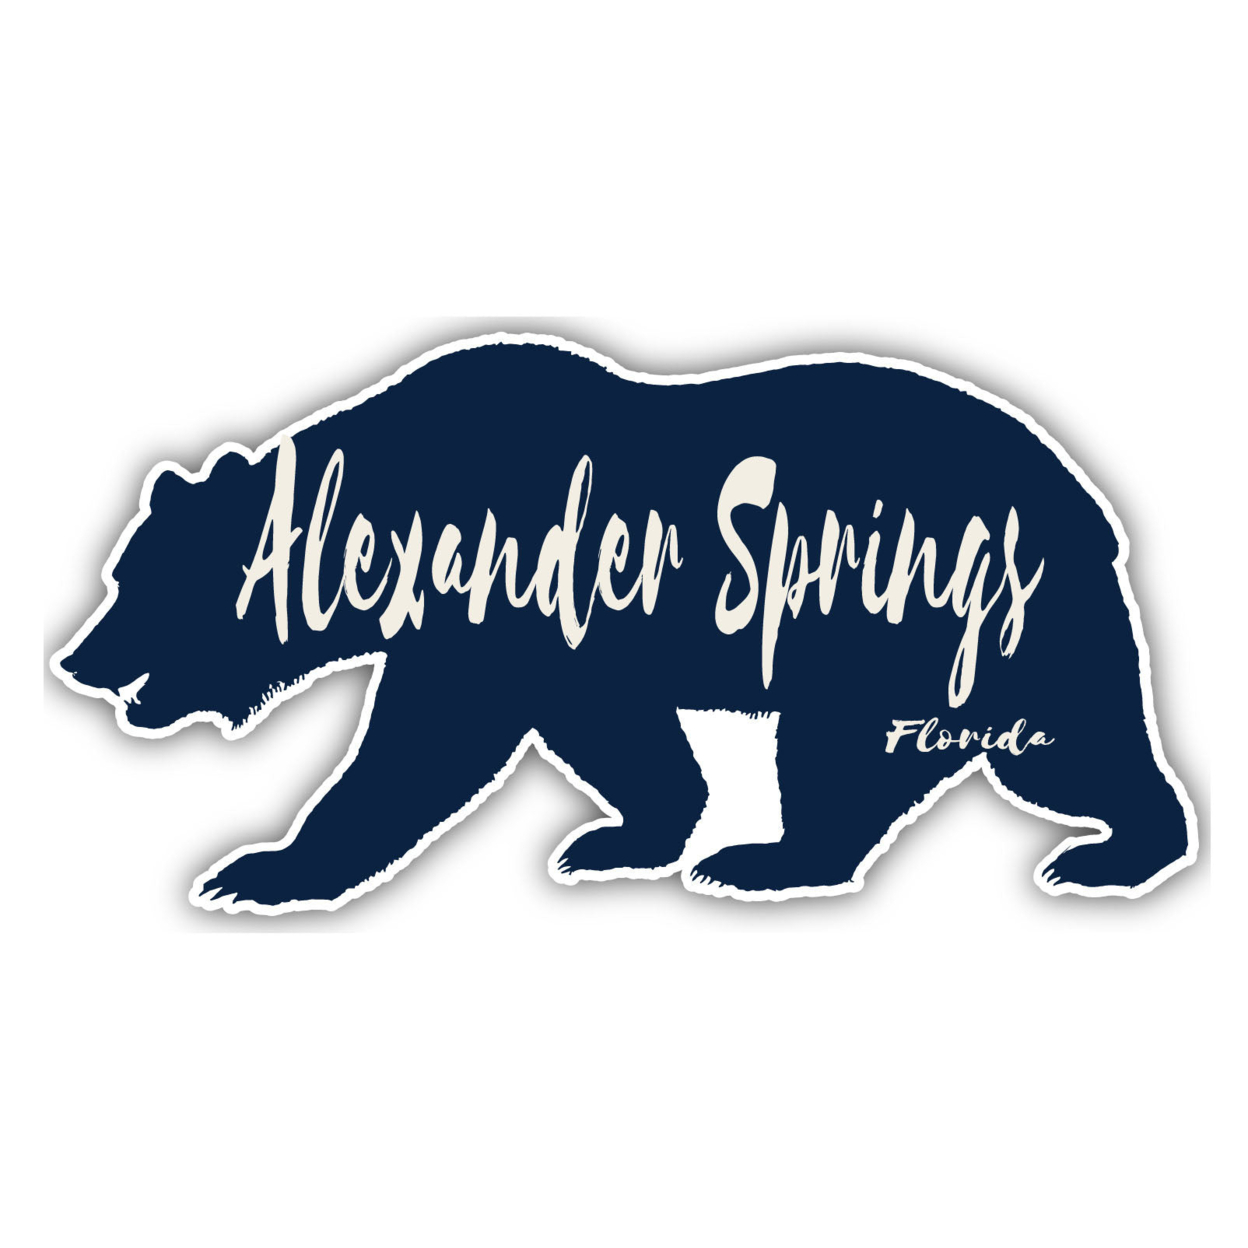 Alexander Springs Florida Souvenir Decorative Stickers (Choose Theme And Size) - 4-Pack, 8-Inch, Tent